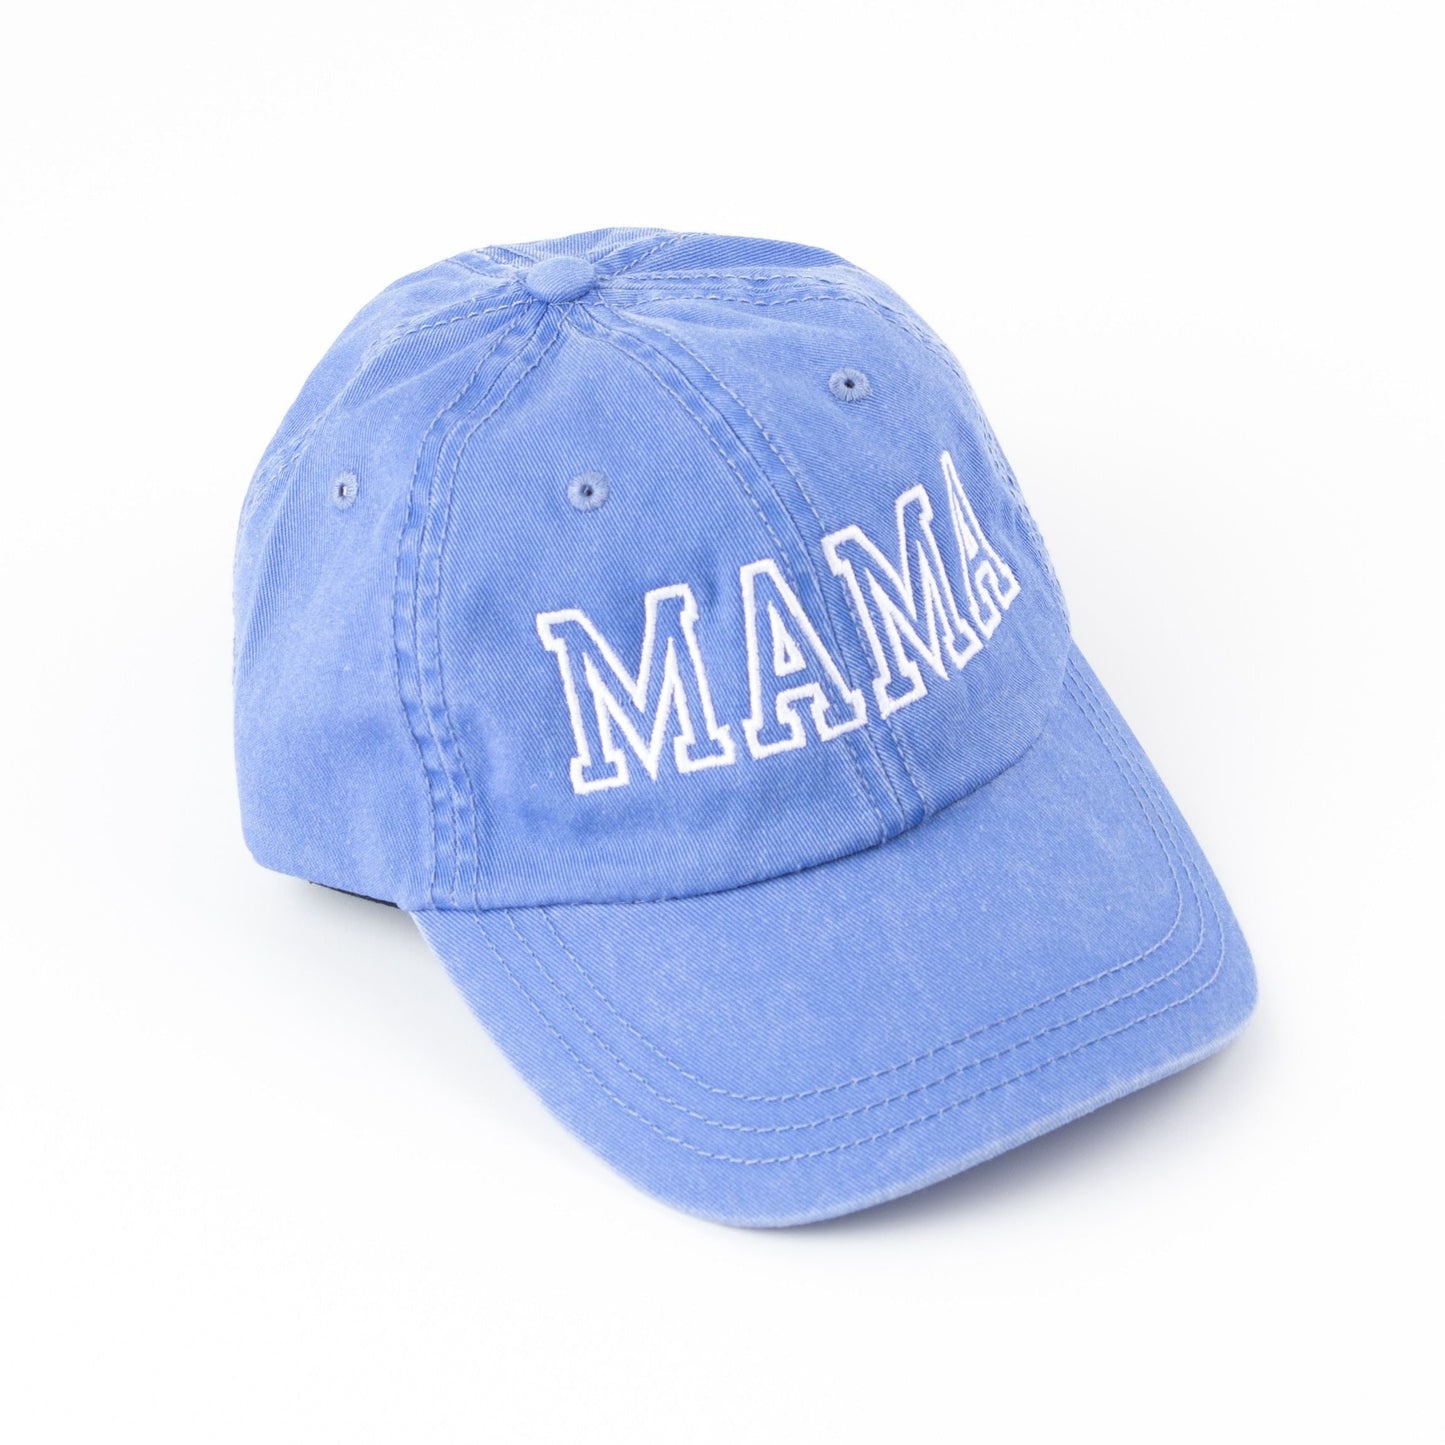 Embroidered Mama Outlined | Canvas Hat